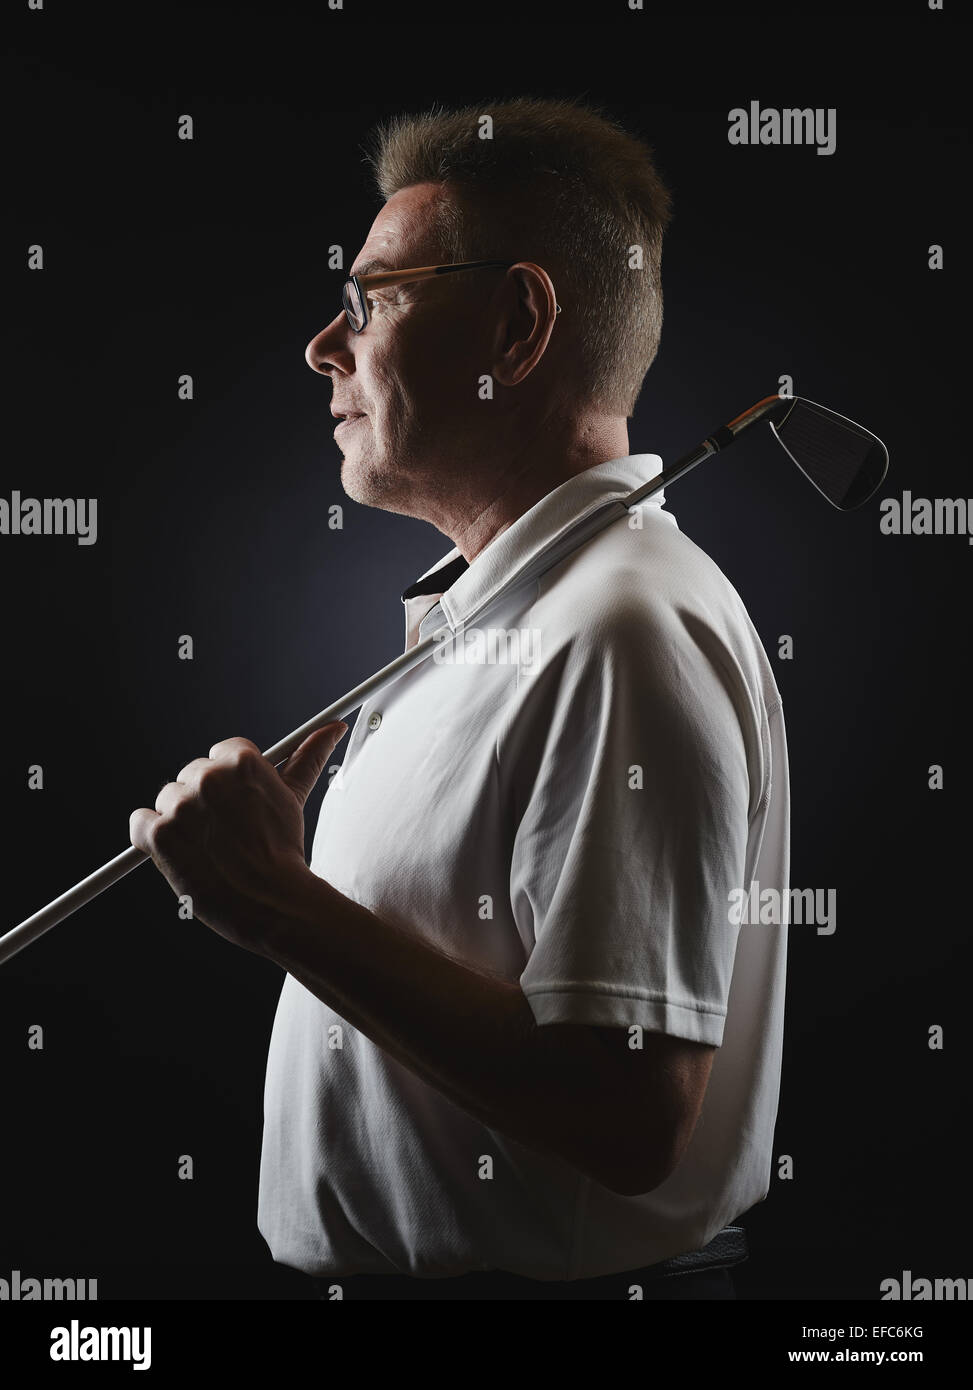 Side view, mature man golfer wearing a white shirt and he holds a iron golf club on his shoulder - studio shot, black background Stock Photo